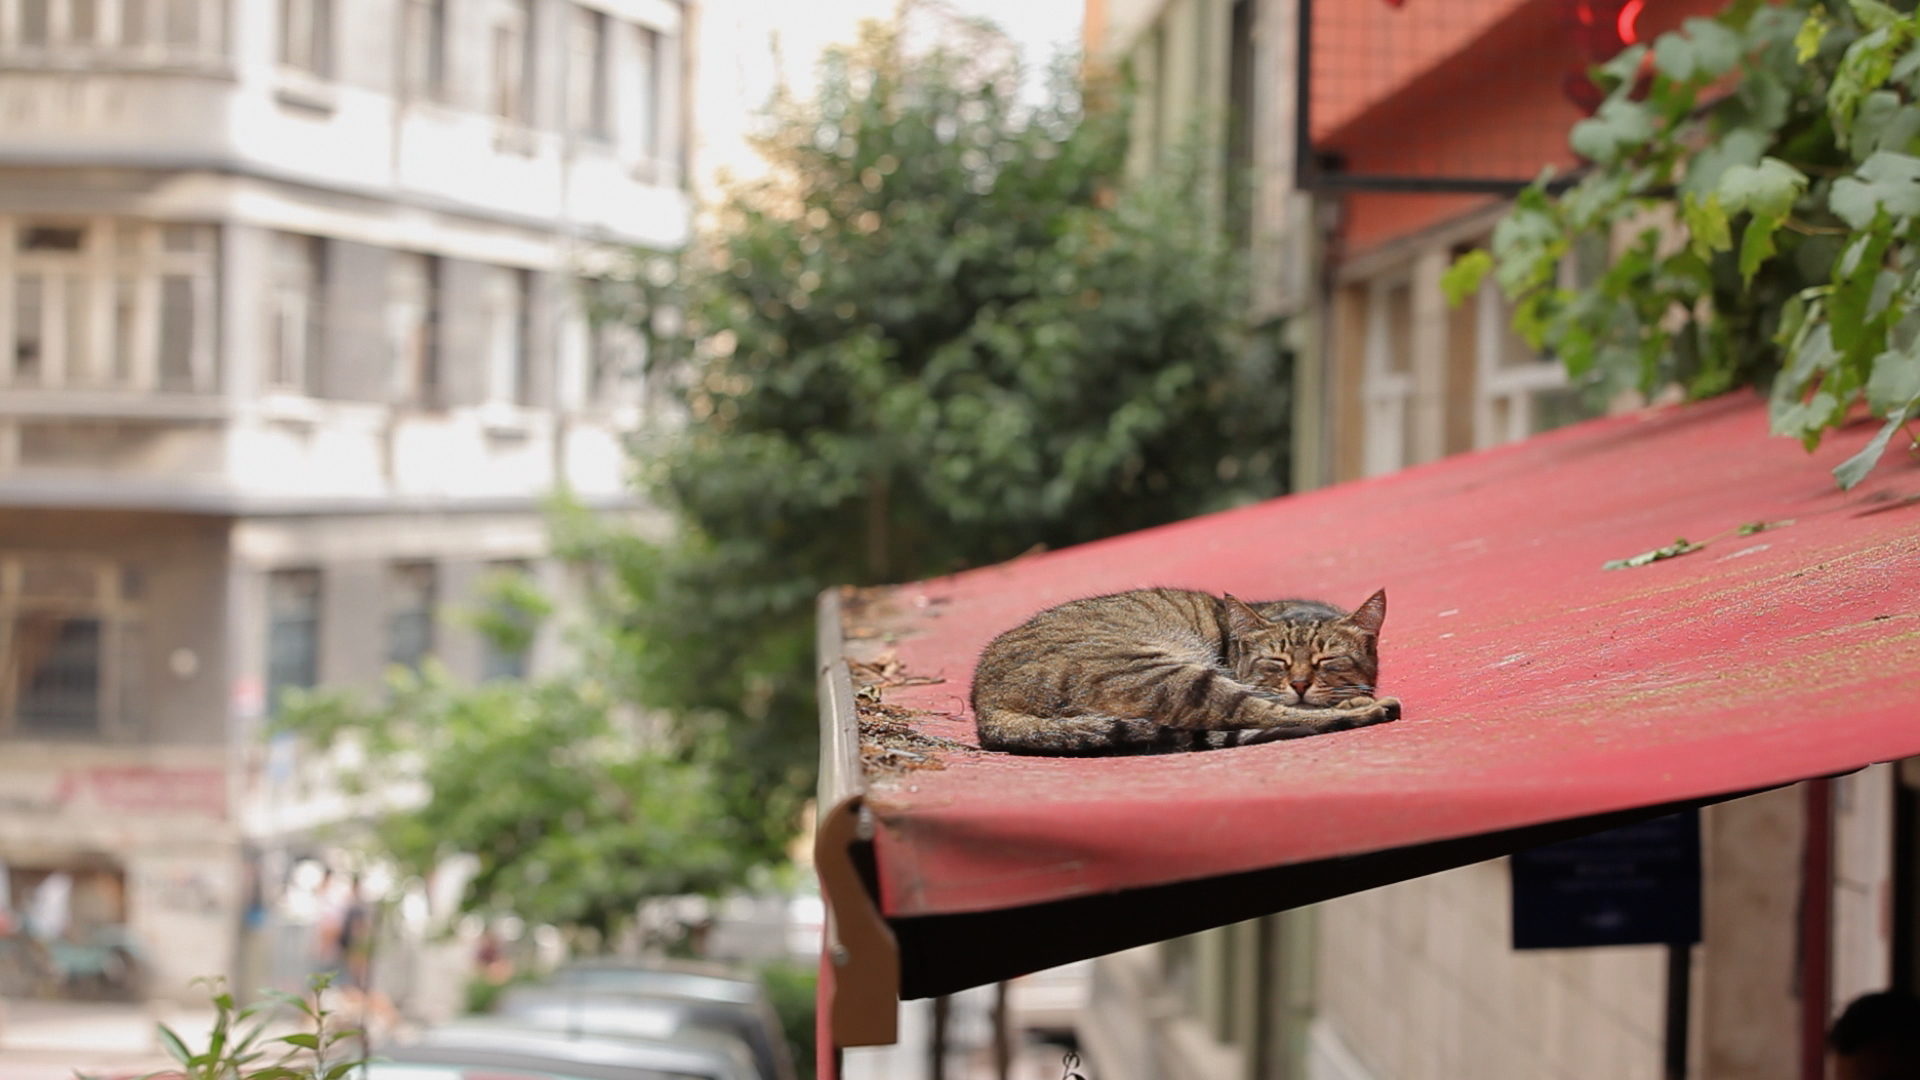 The Paris Review - A New Documentary Looks at the Alley Cats of Istanbul